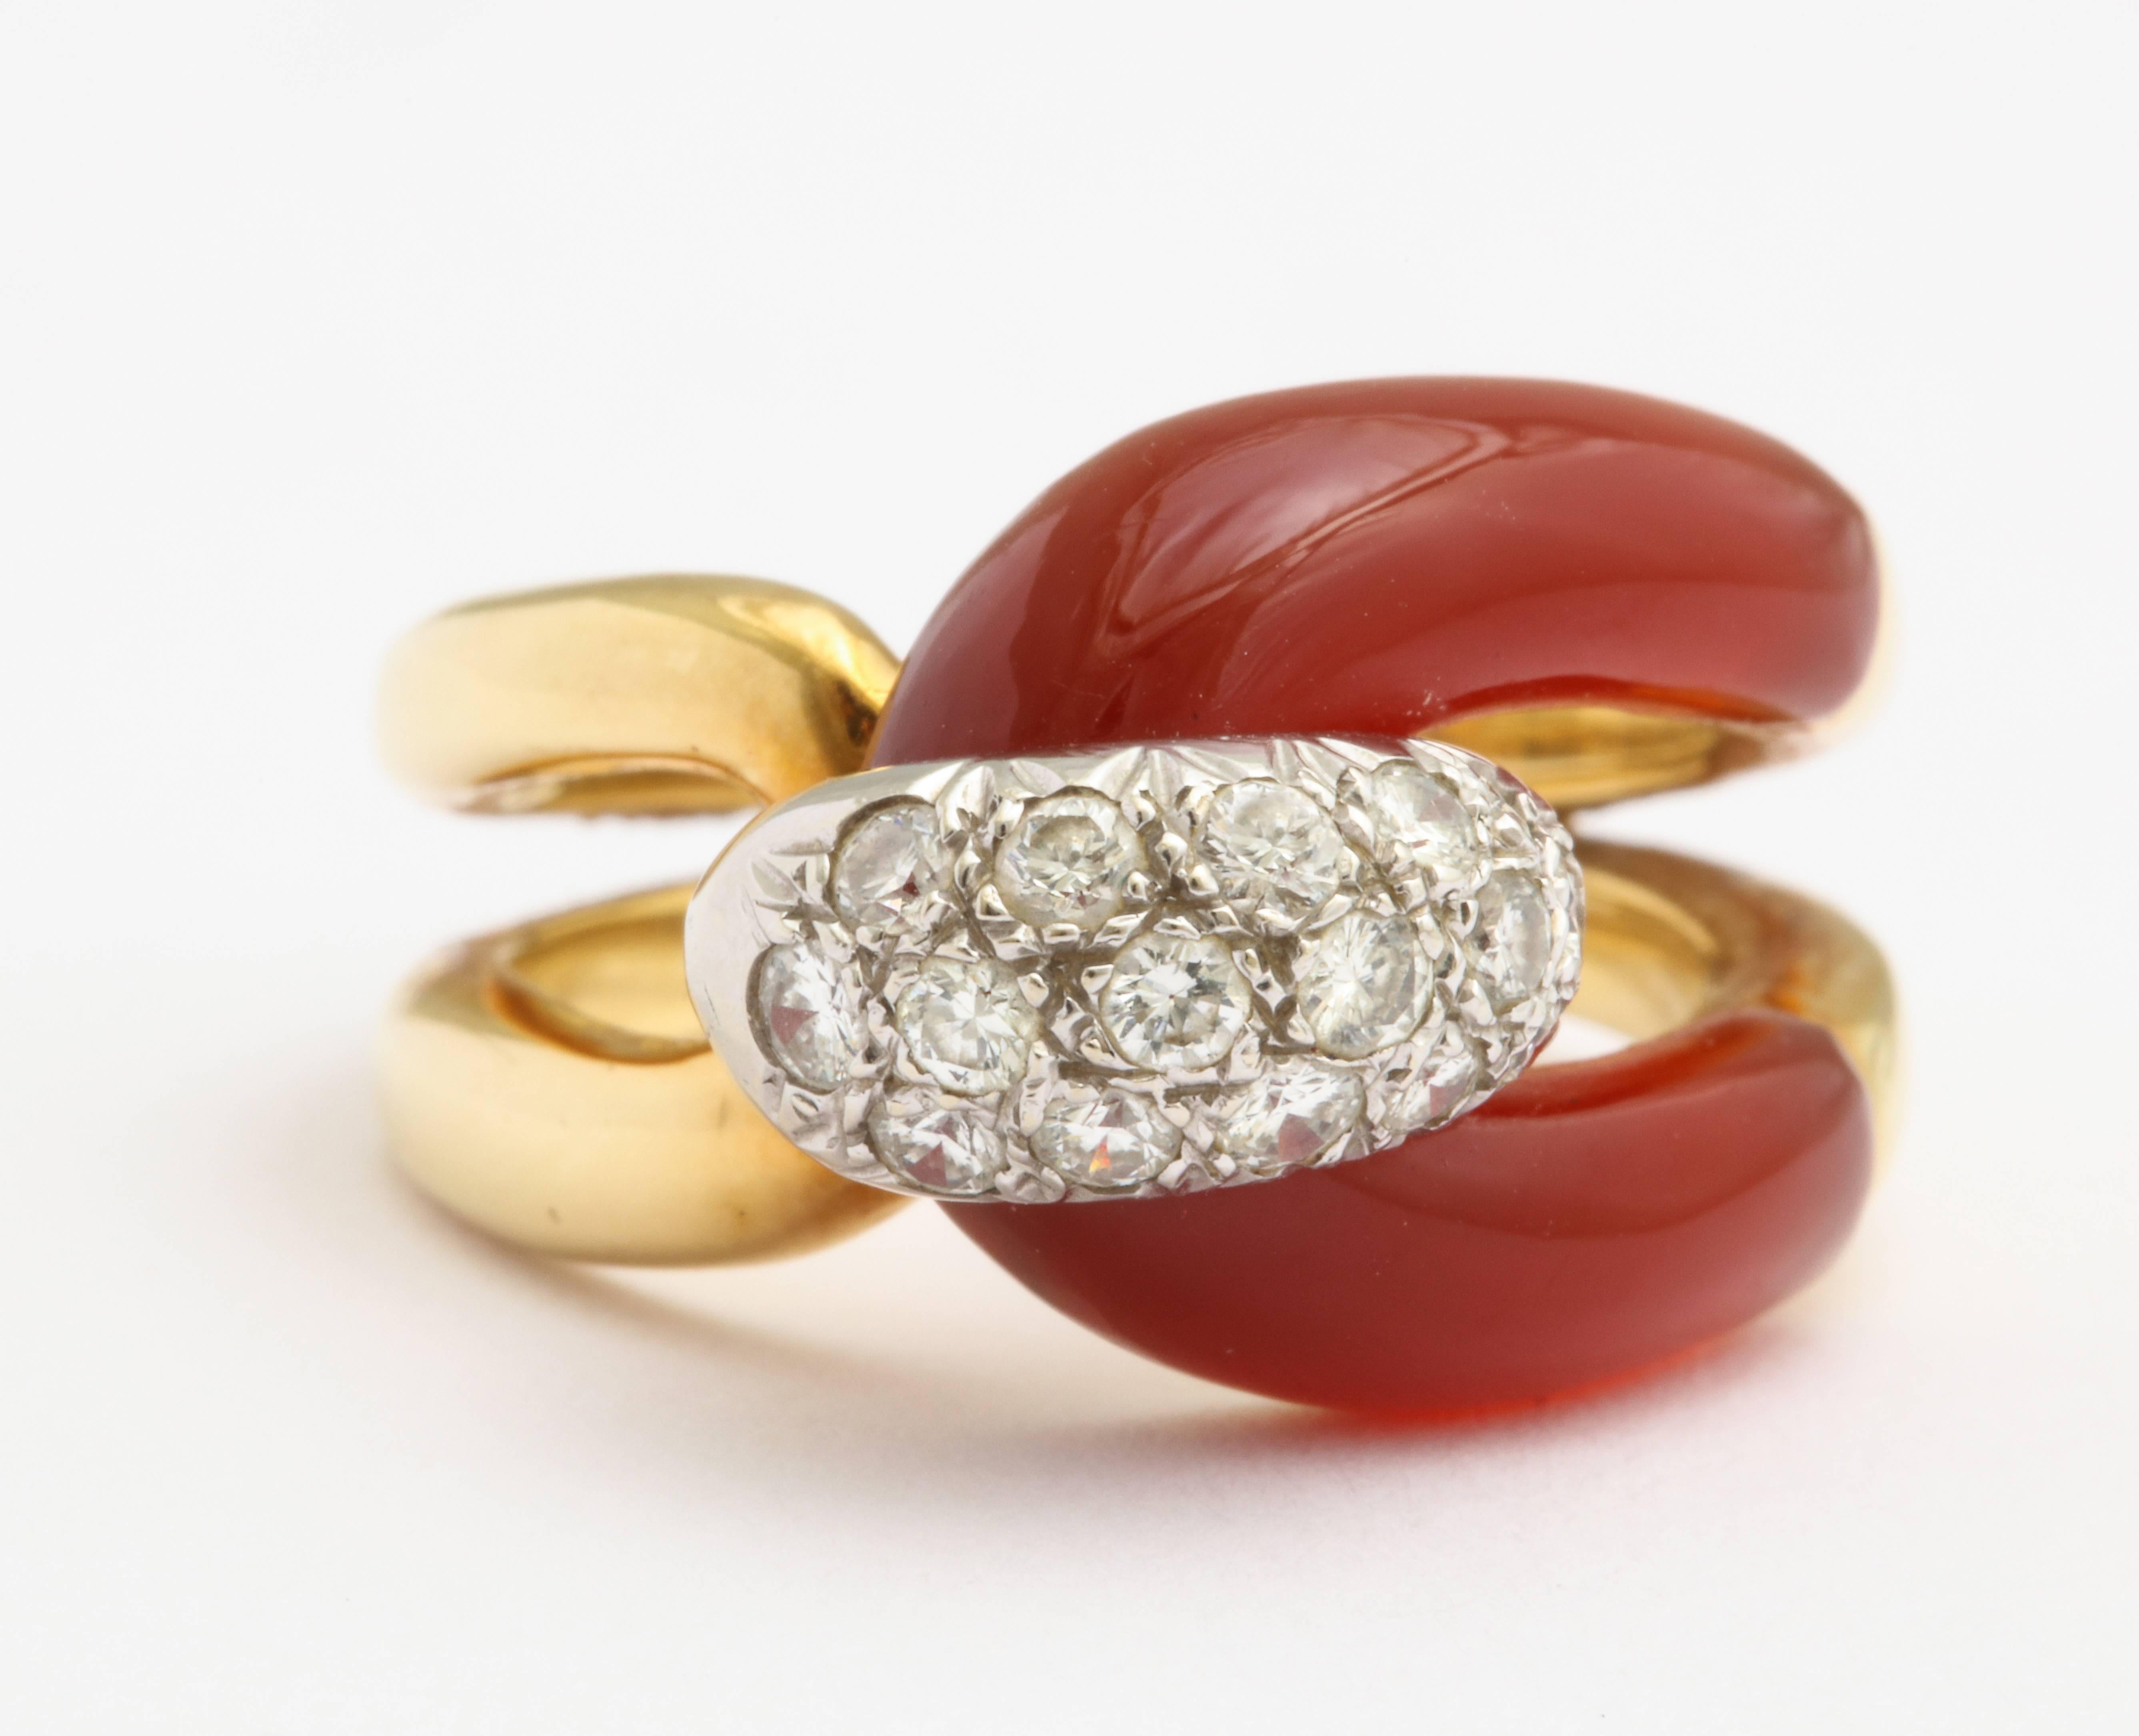 An 18 karat yellow gold ring featuring carnelian and diamonds. Estimated diamond weight is 0.48 carats total. Ring size 5.5.